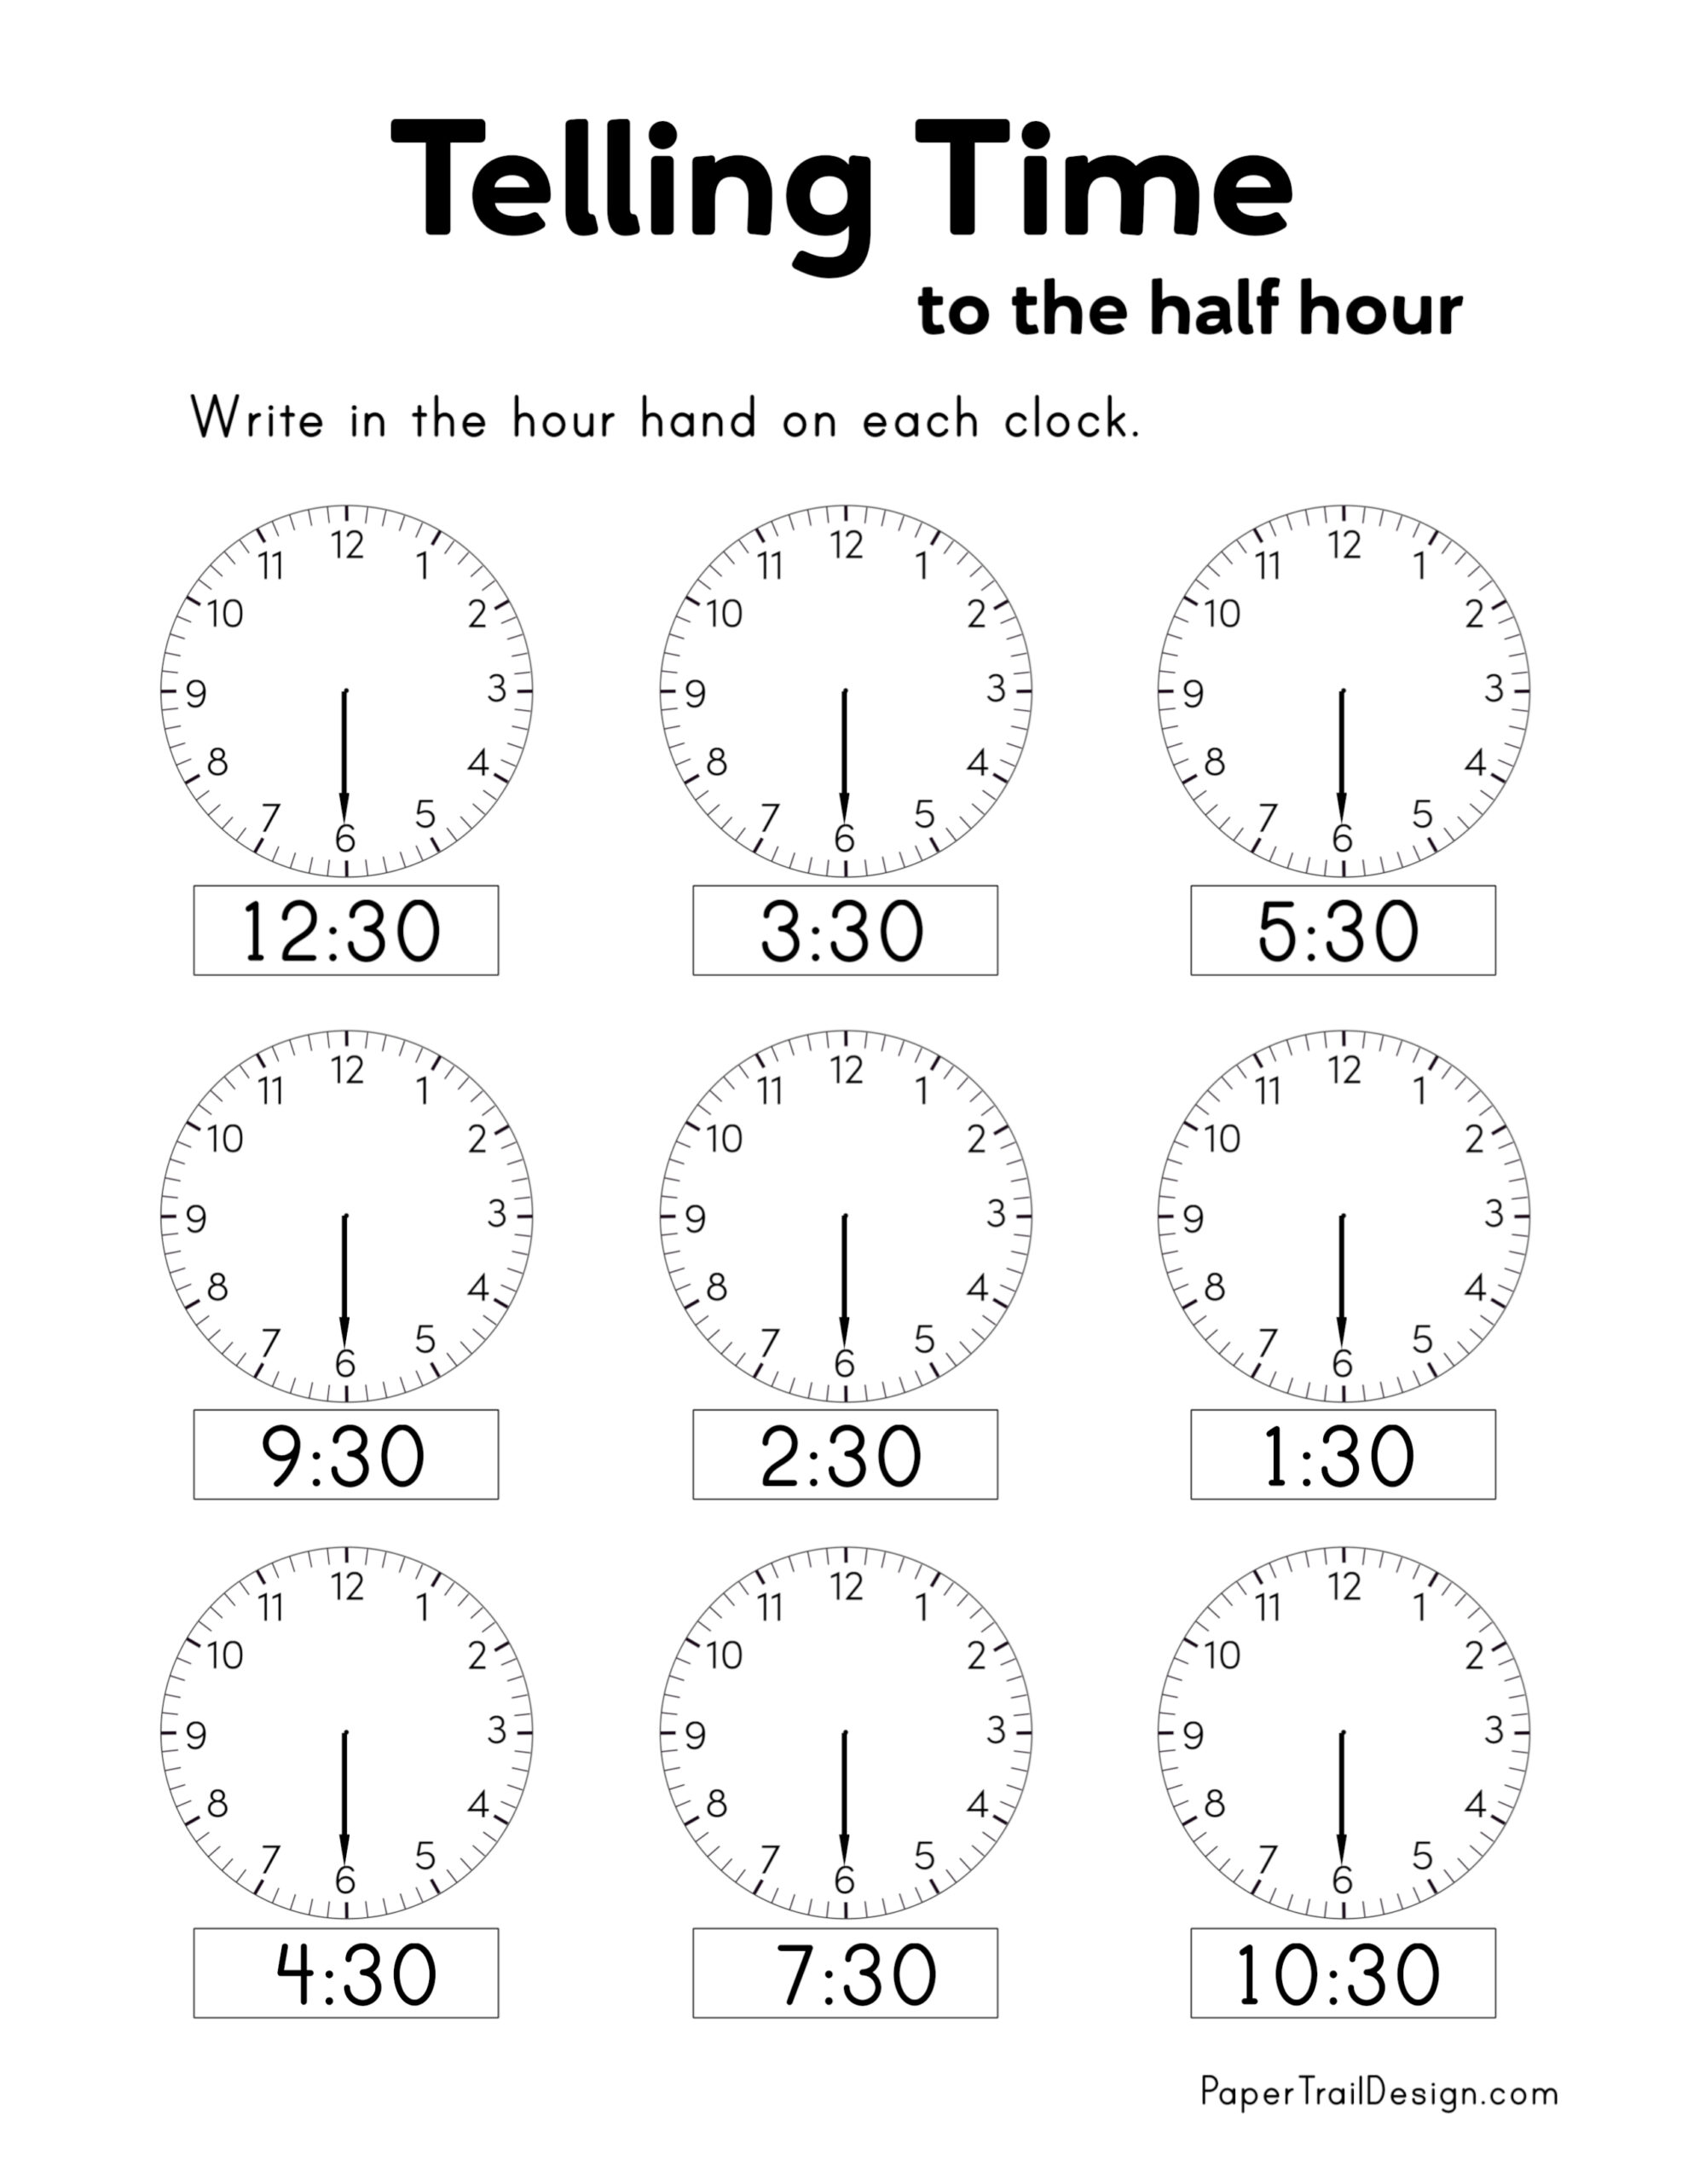 Telling the time worksheet. Telling the time. Telling the time Worksheets. Telling the time задания ответы. Tell the time Worksheets.